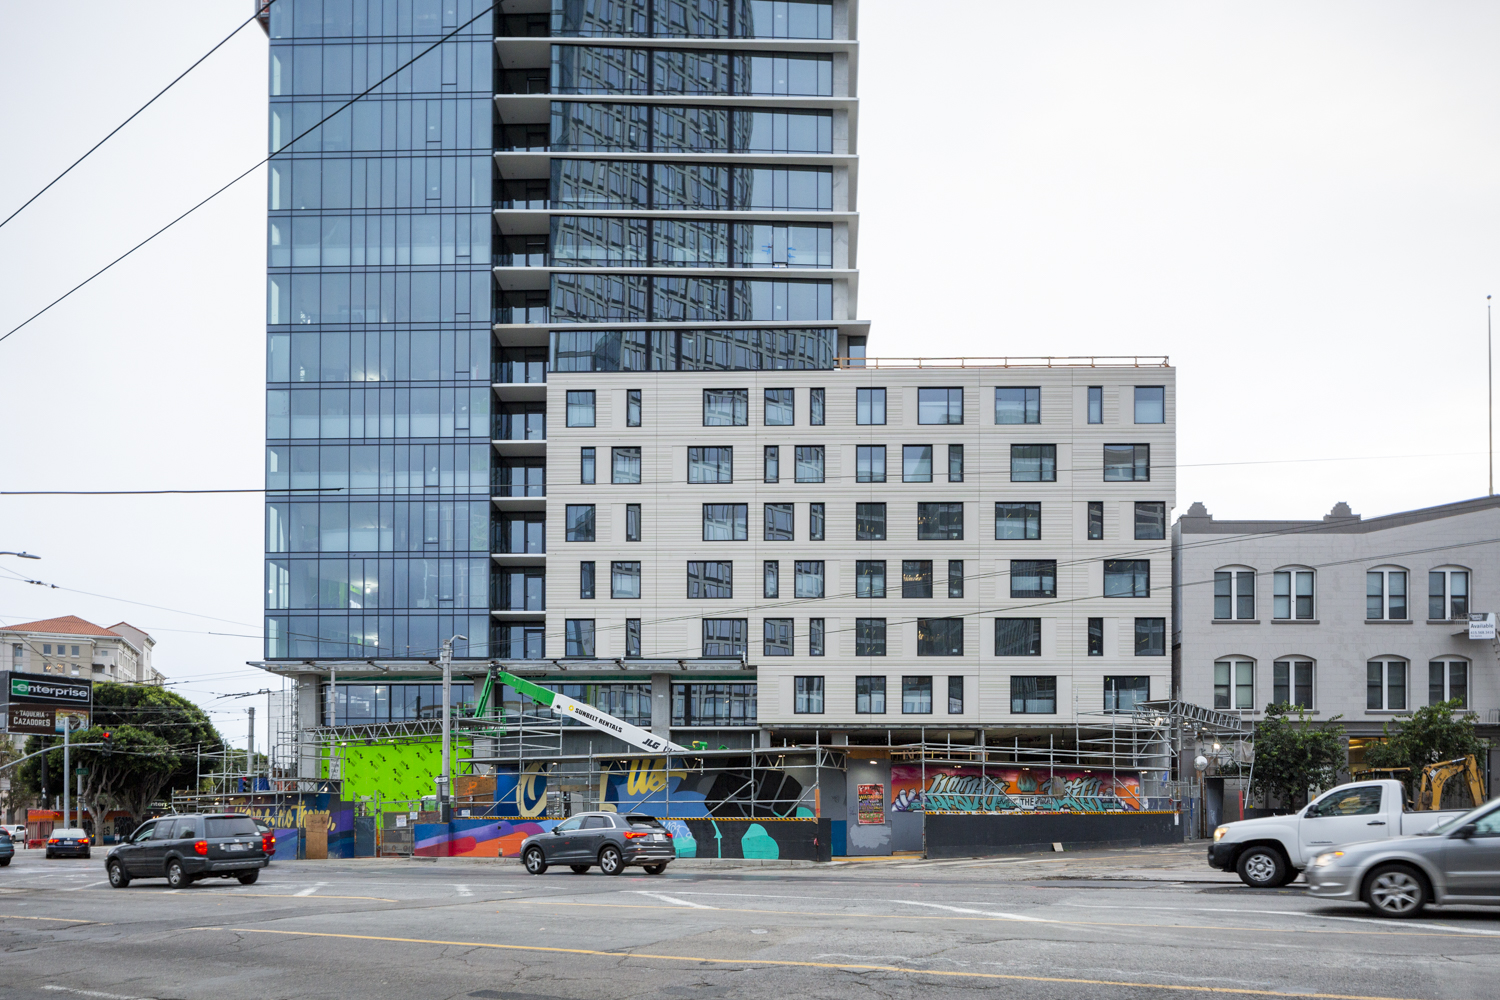 30 Otis Street Tops Out, Facade Nearly Complete in SoMa